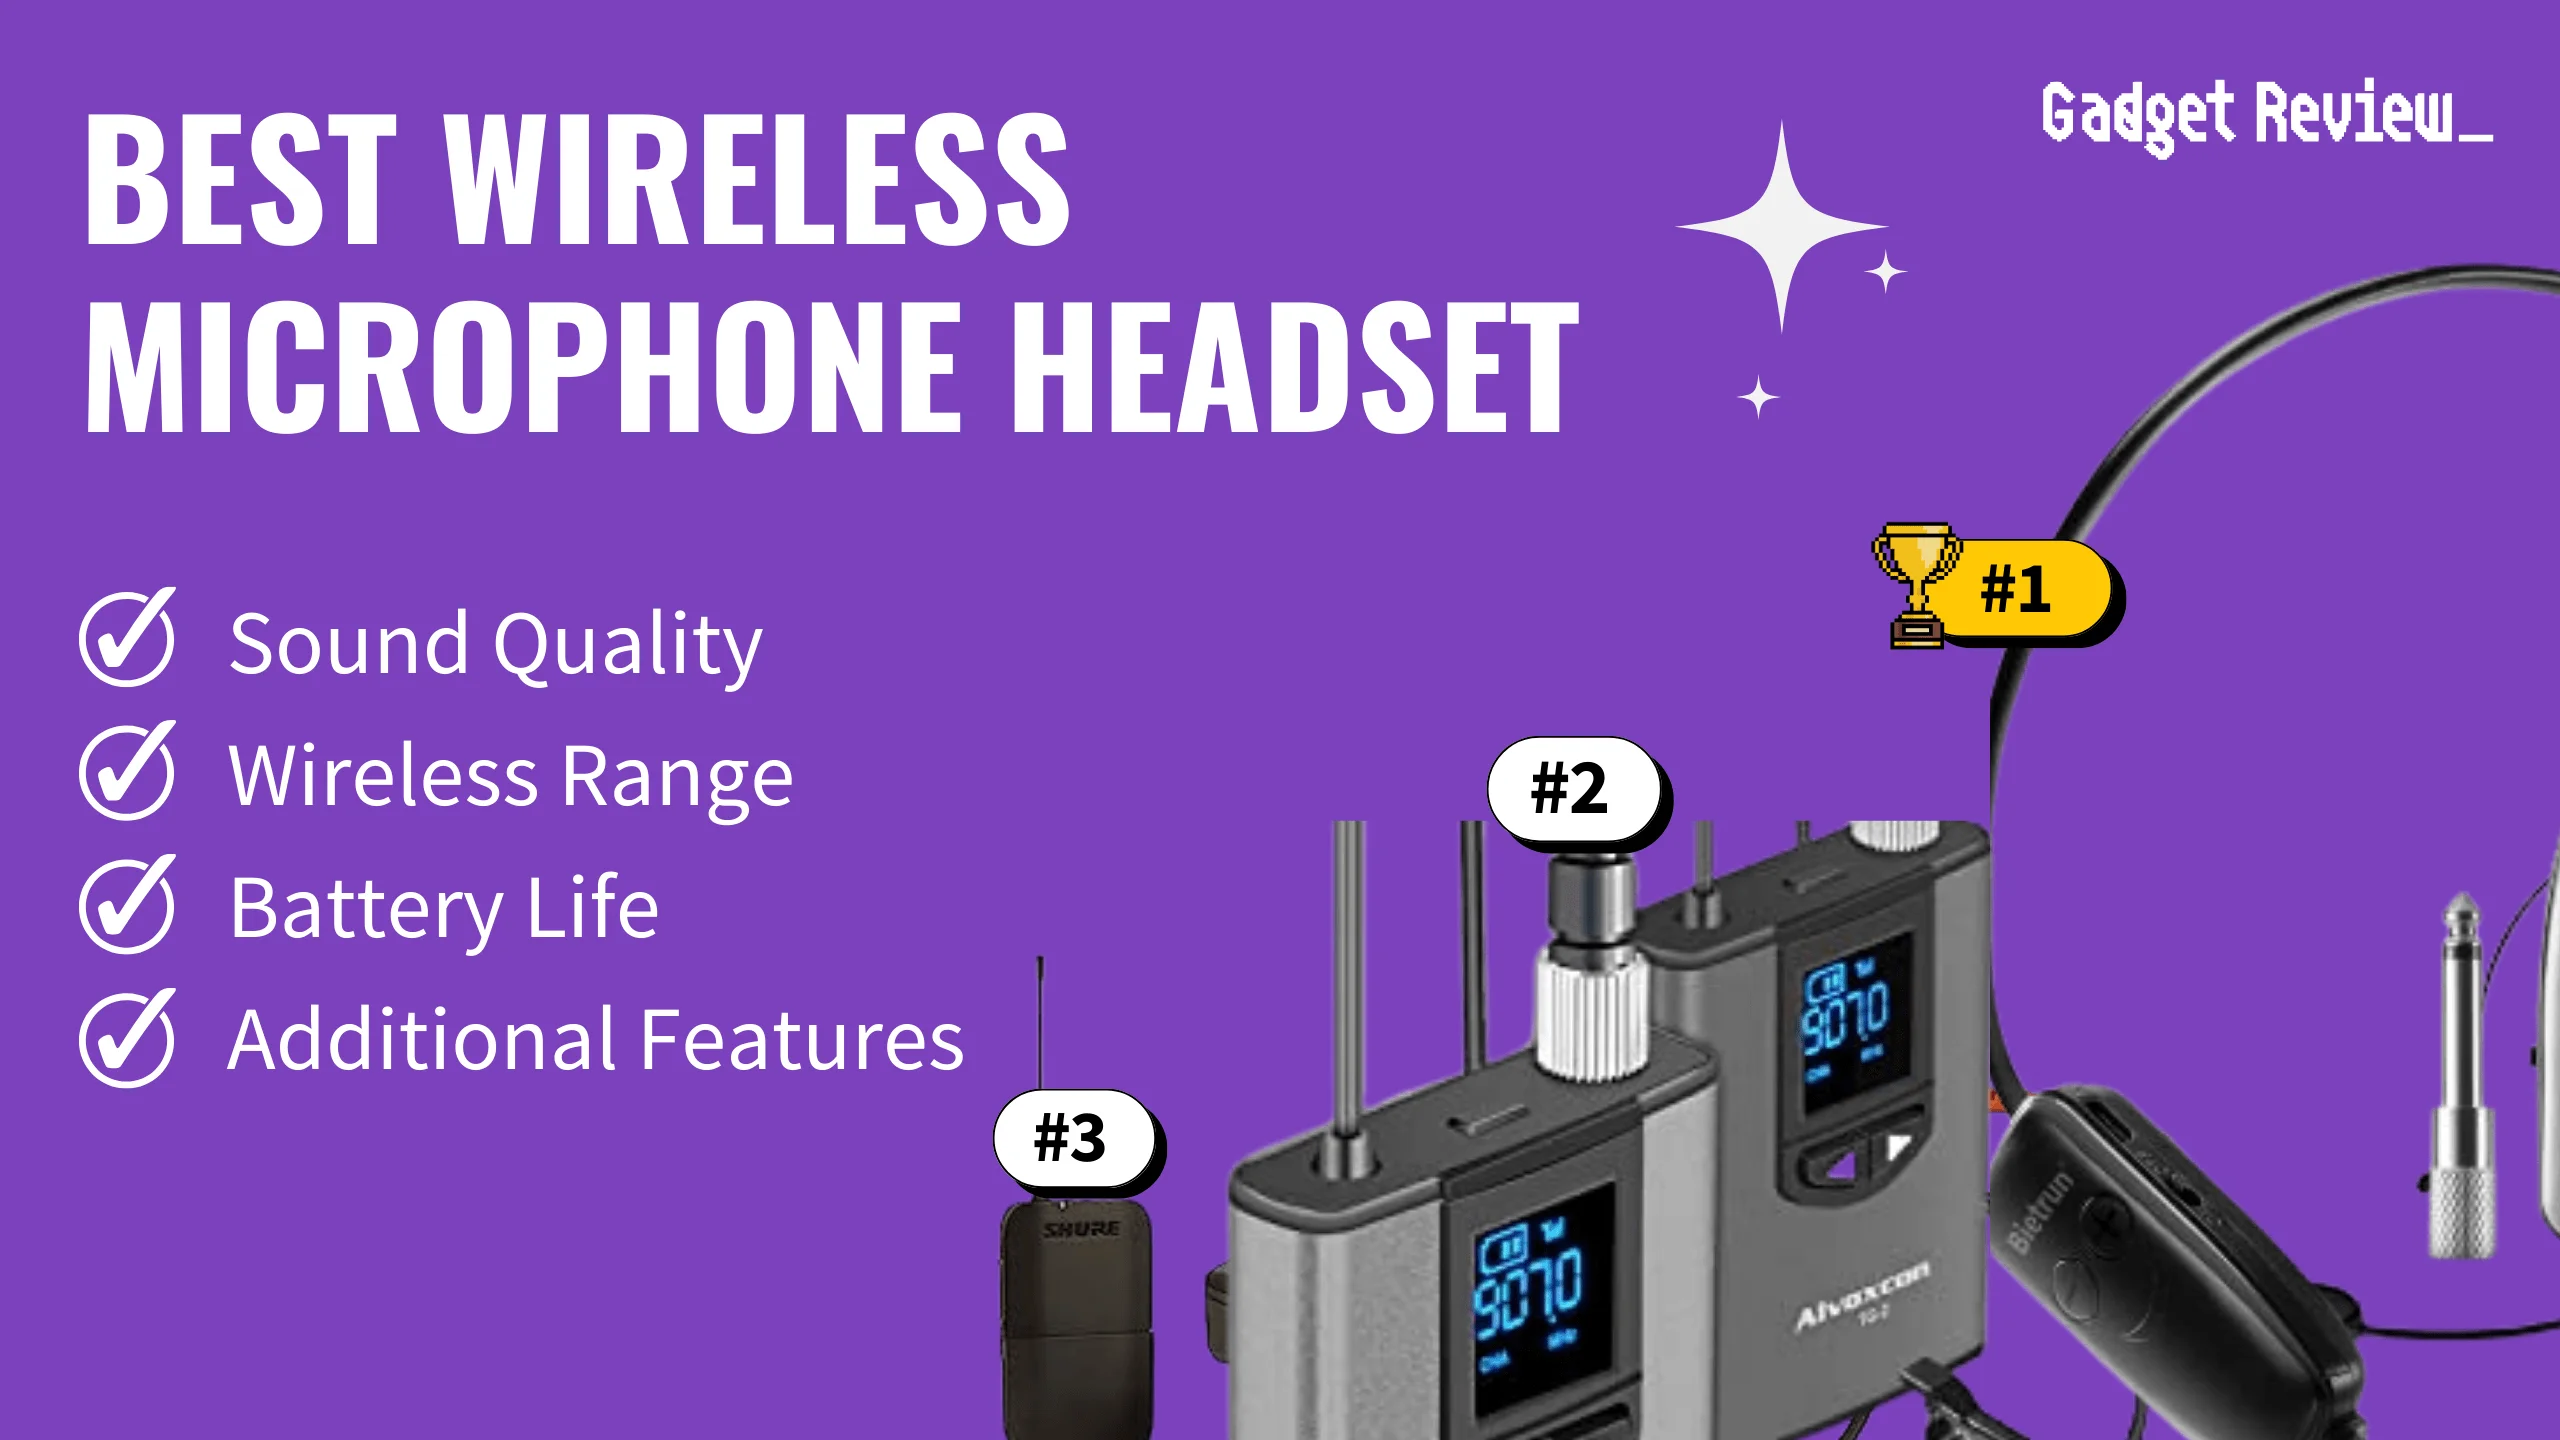 best wireless microphone headset featured image that shows the top three best gaming headset models